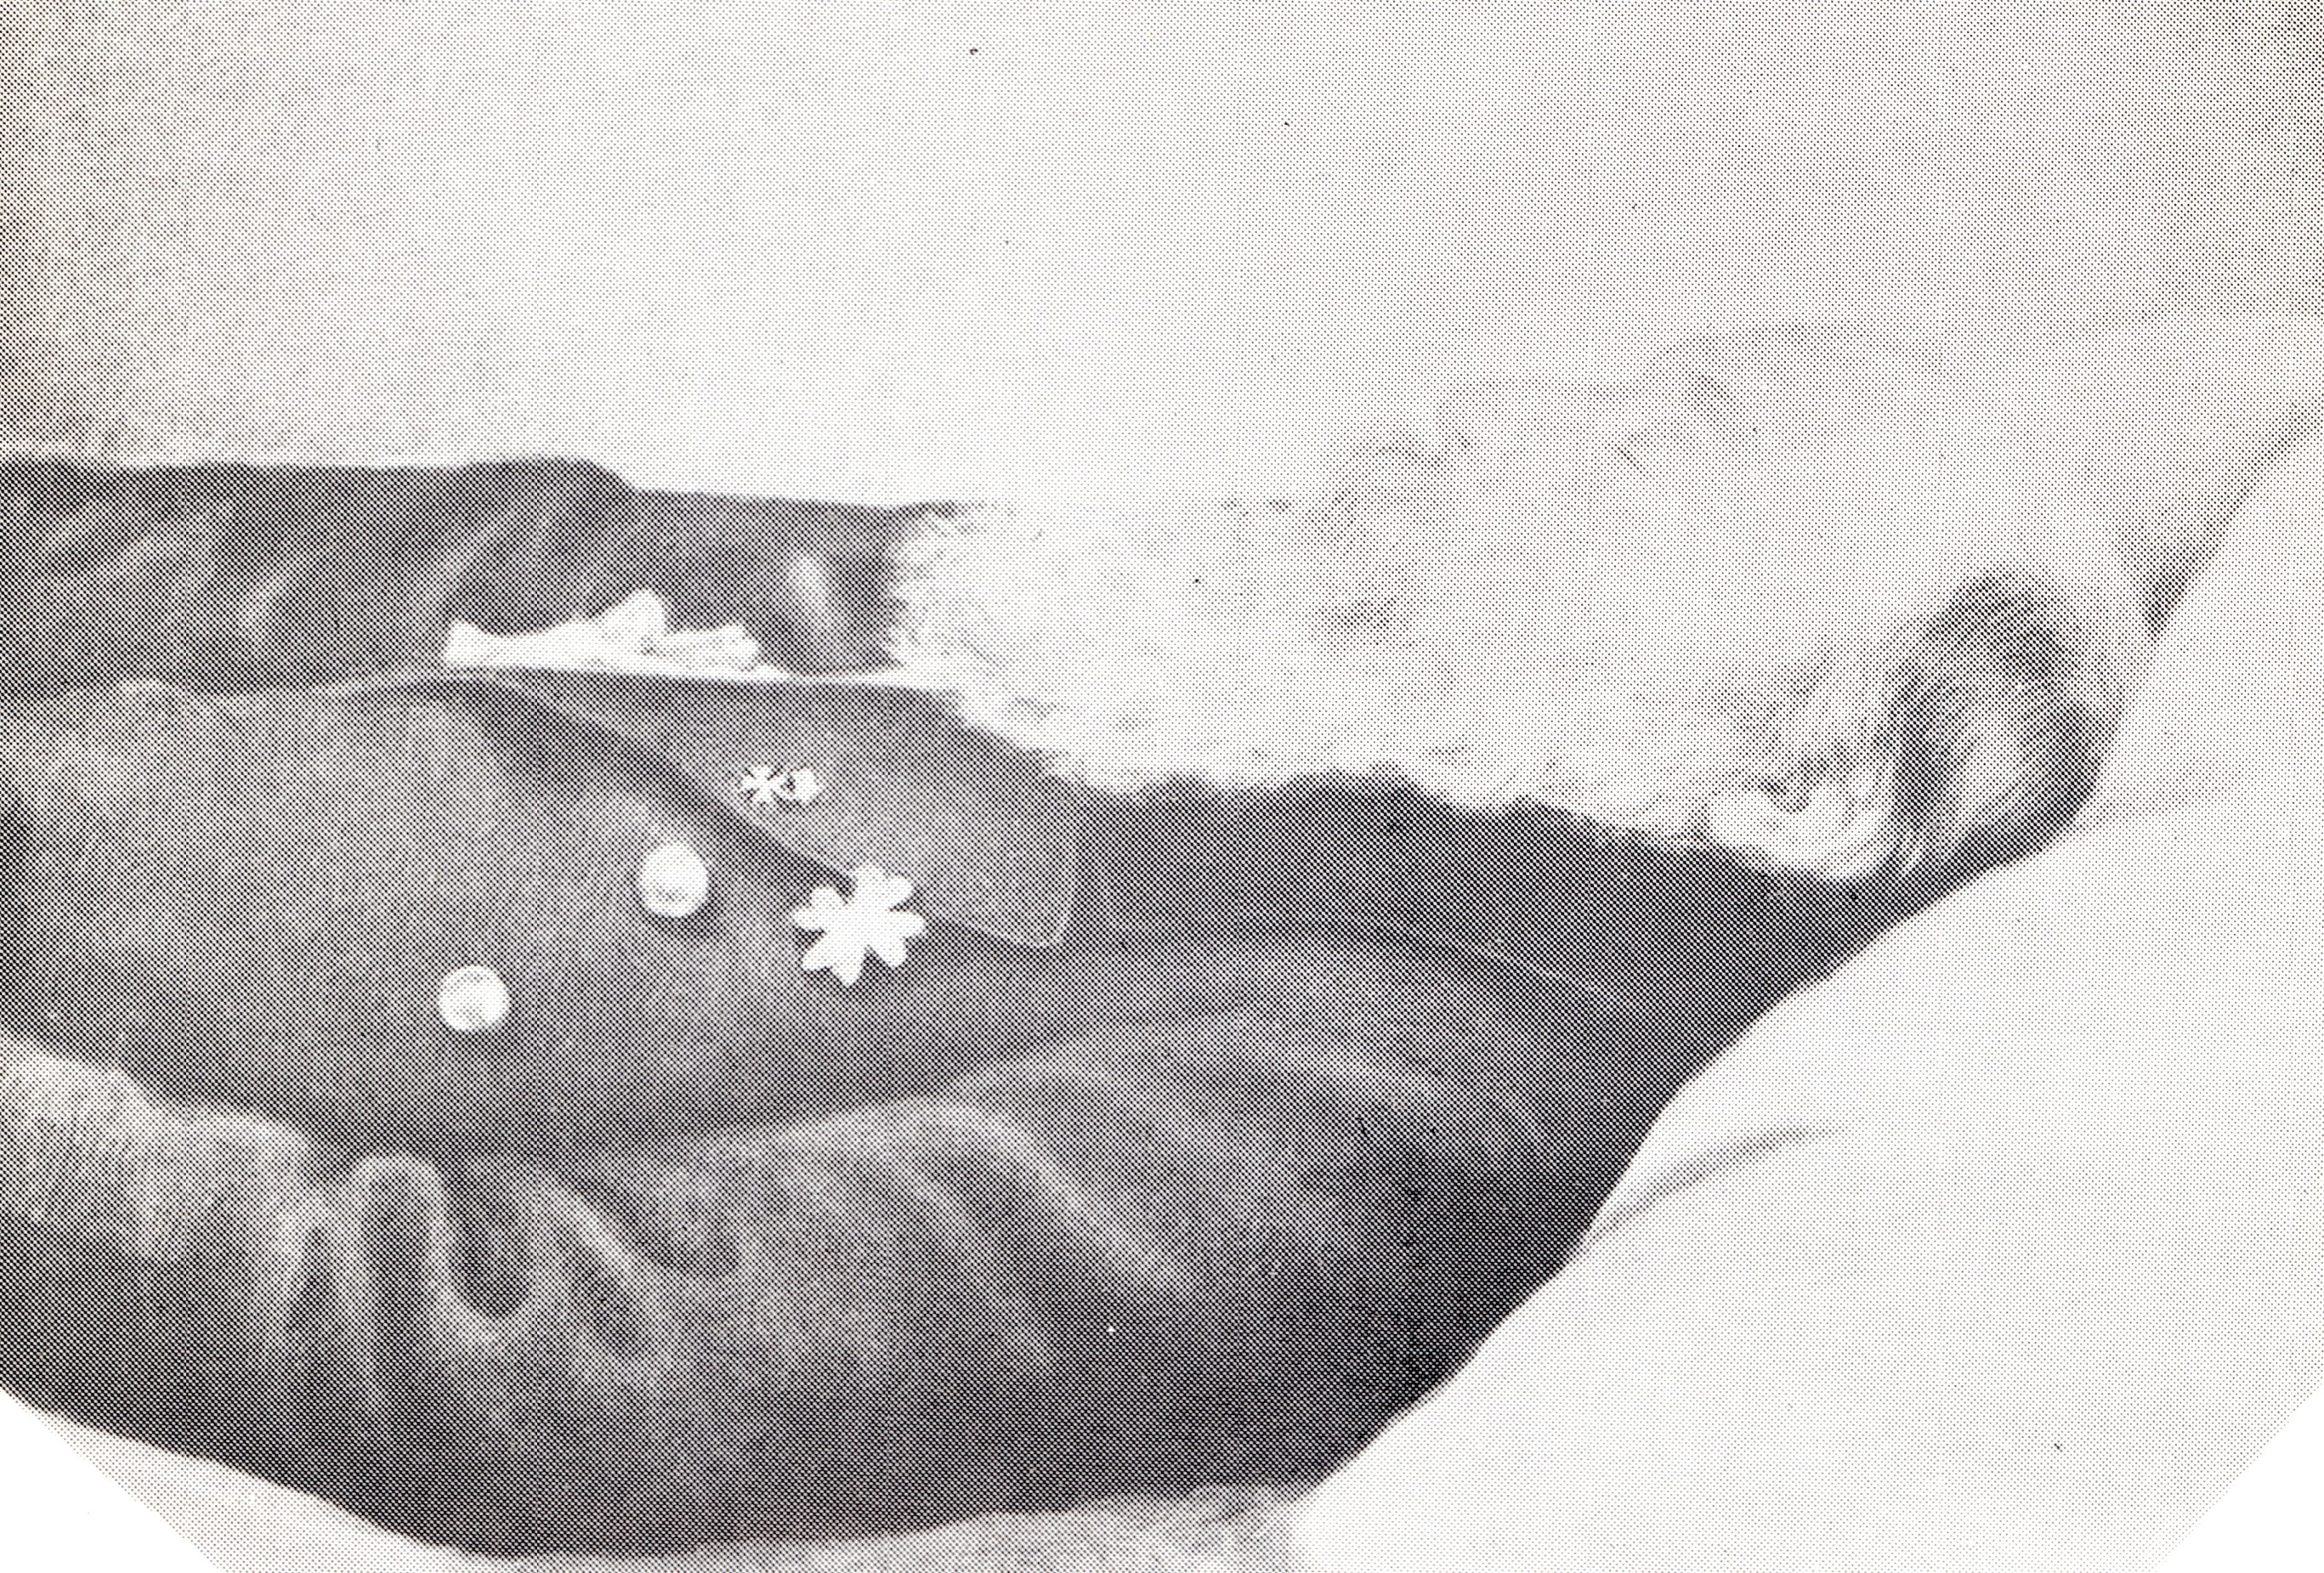 Photograph of Pearsall on his deathbed